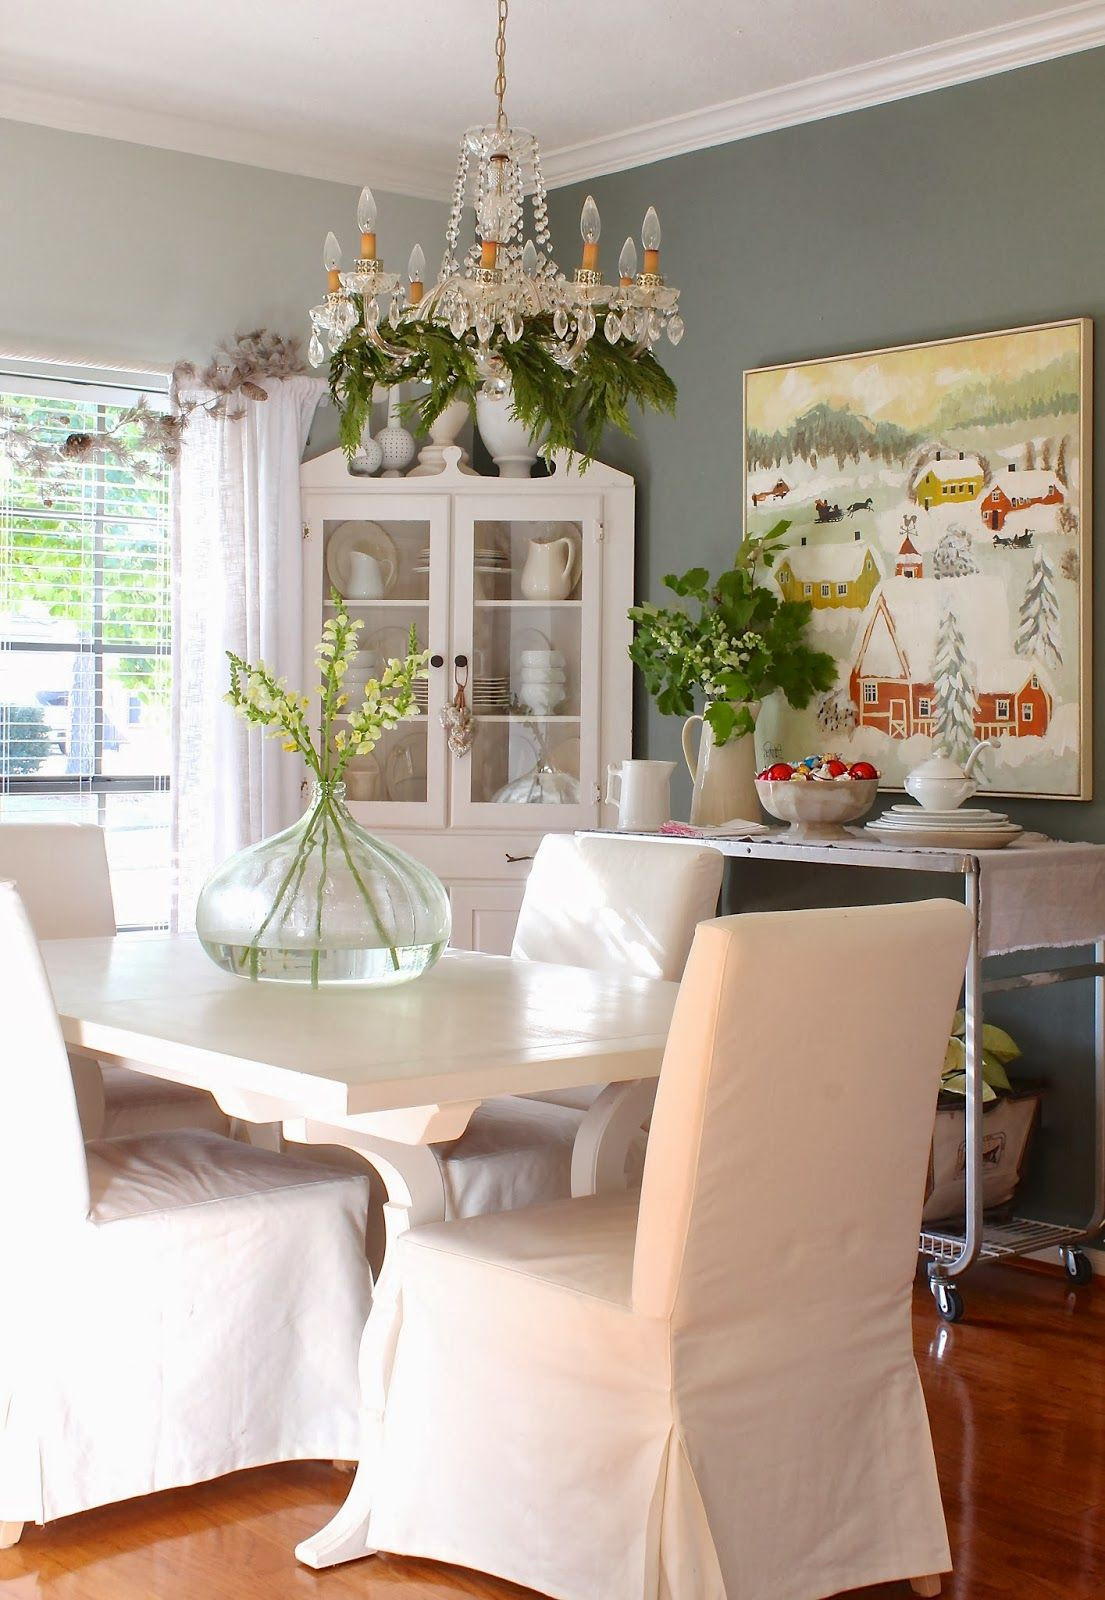 Sea Salt Paint Living Room
 Love the paint colors Lighter color is Sherwin Williams